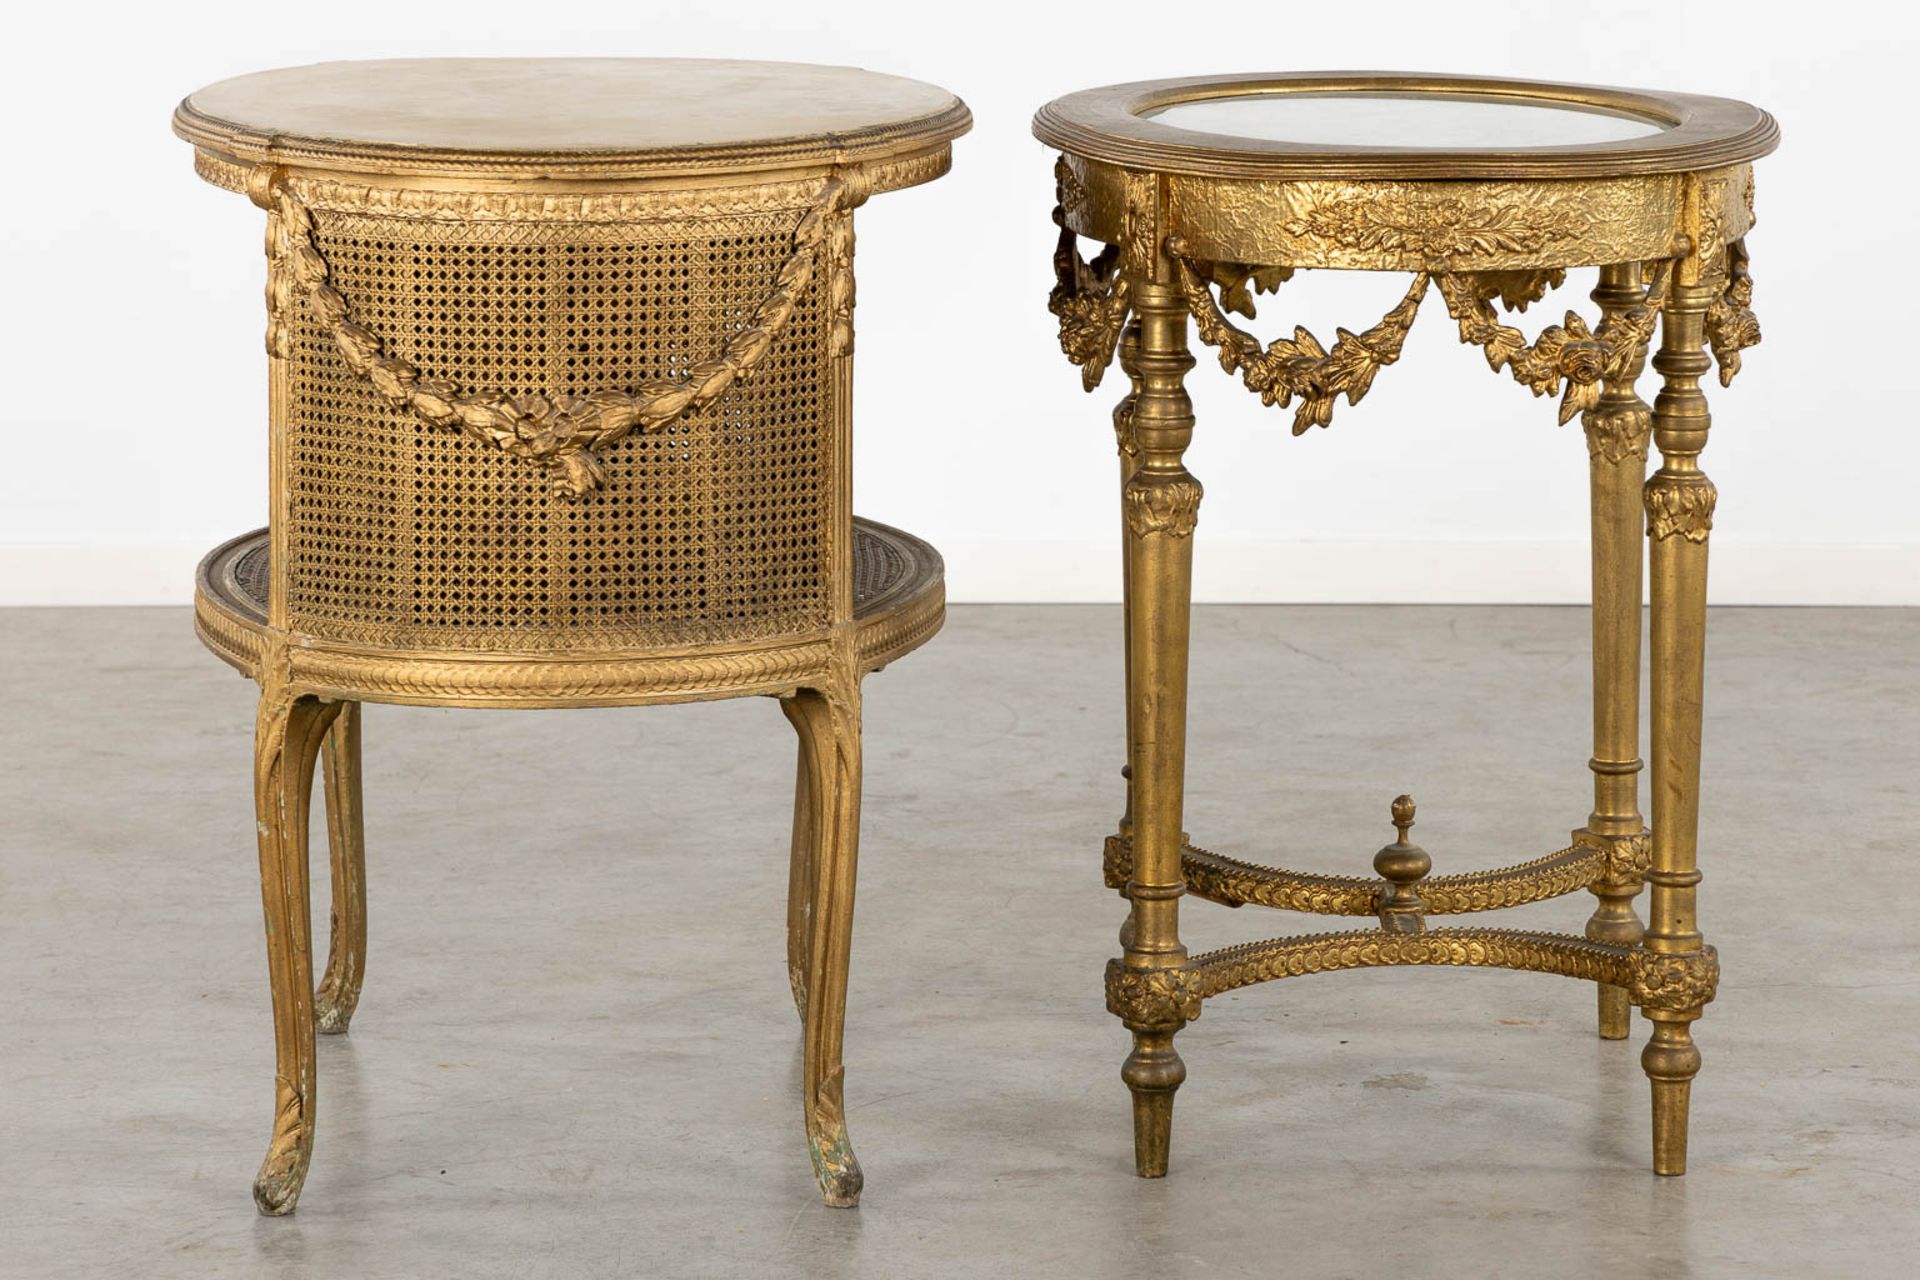 Two side tables, Two chairs, sculptured wood in Louis XVI style. Circa 1900. (L:57 x W:81 x H:75 cm) - Bild 6 aus 18